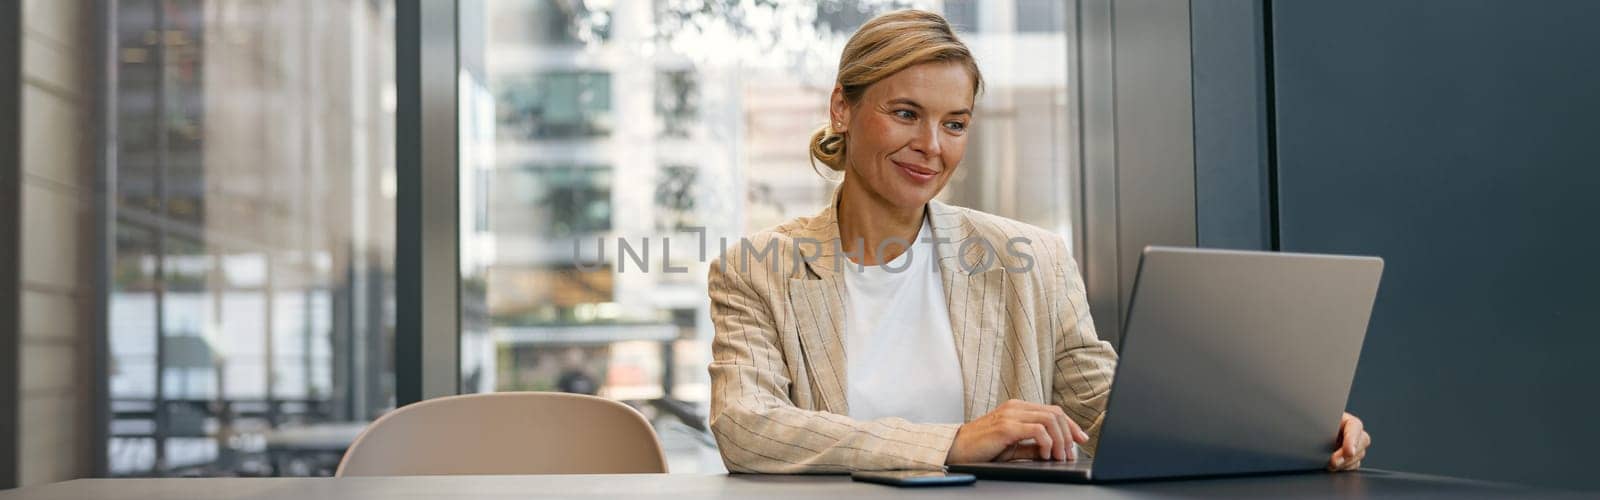 Stylish business woman working on laptop sitting the desk on office background